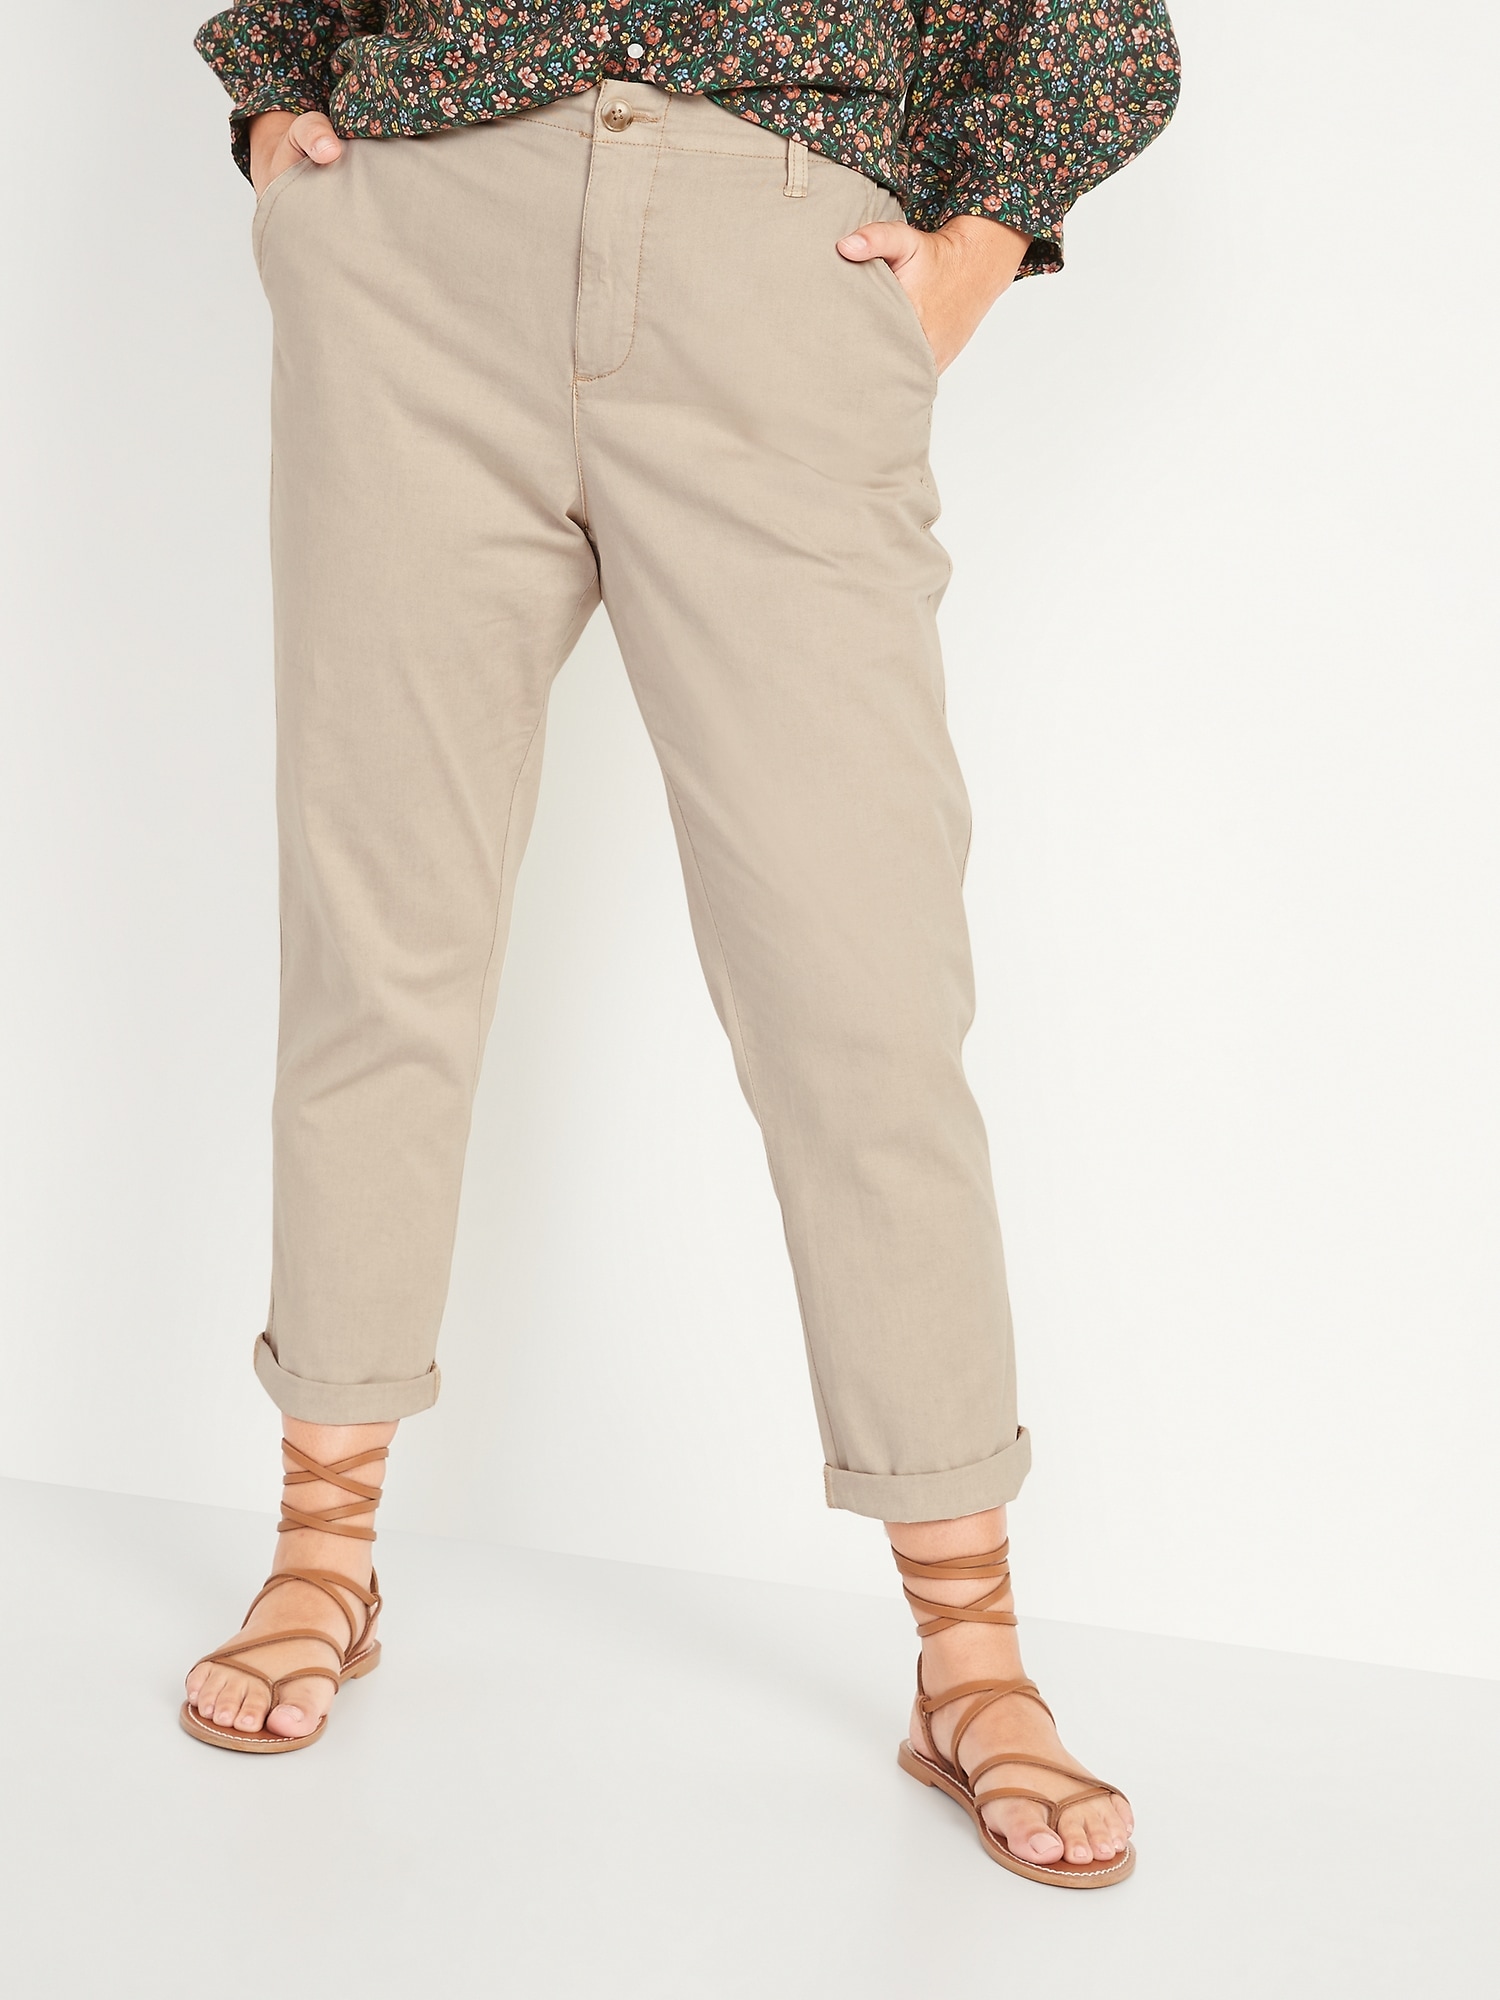 Old Navy A Stone's Throw High-Waisted OGC Chino Pants Size 2X